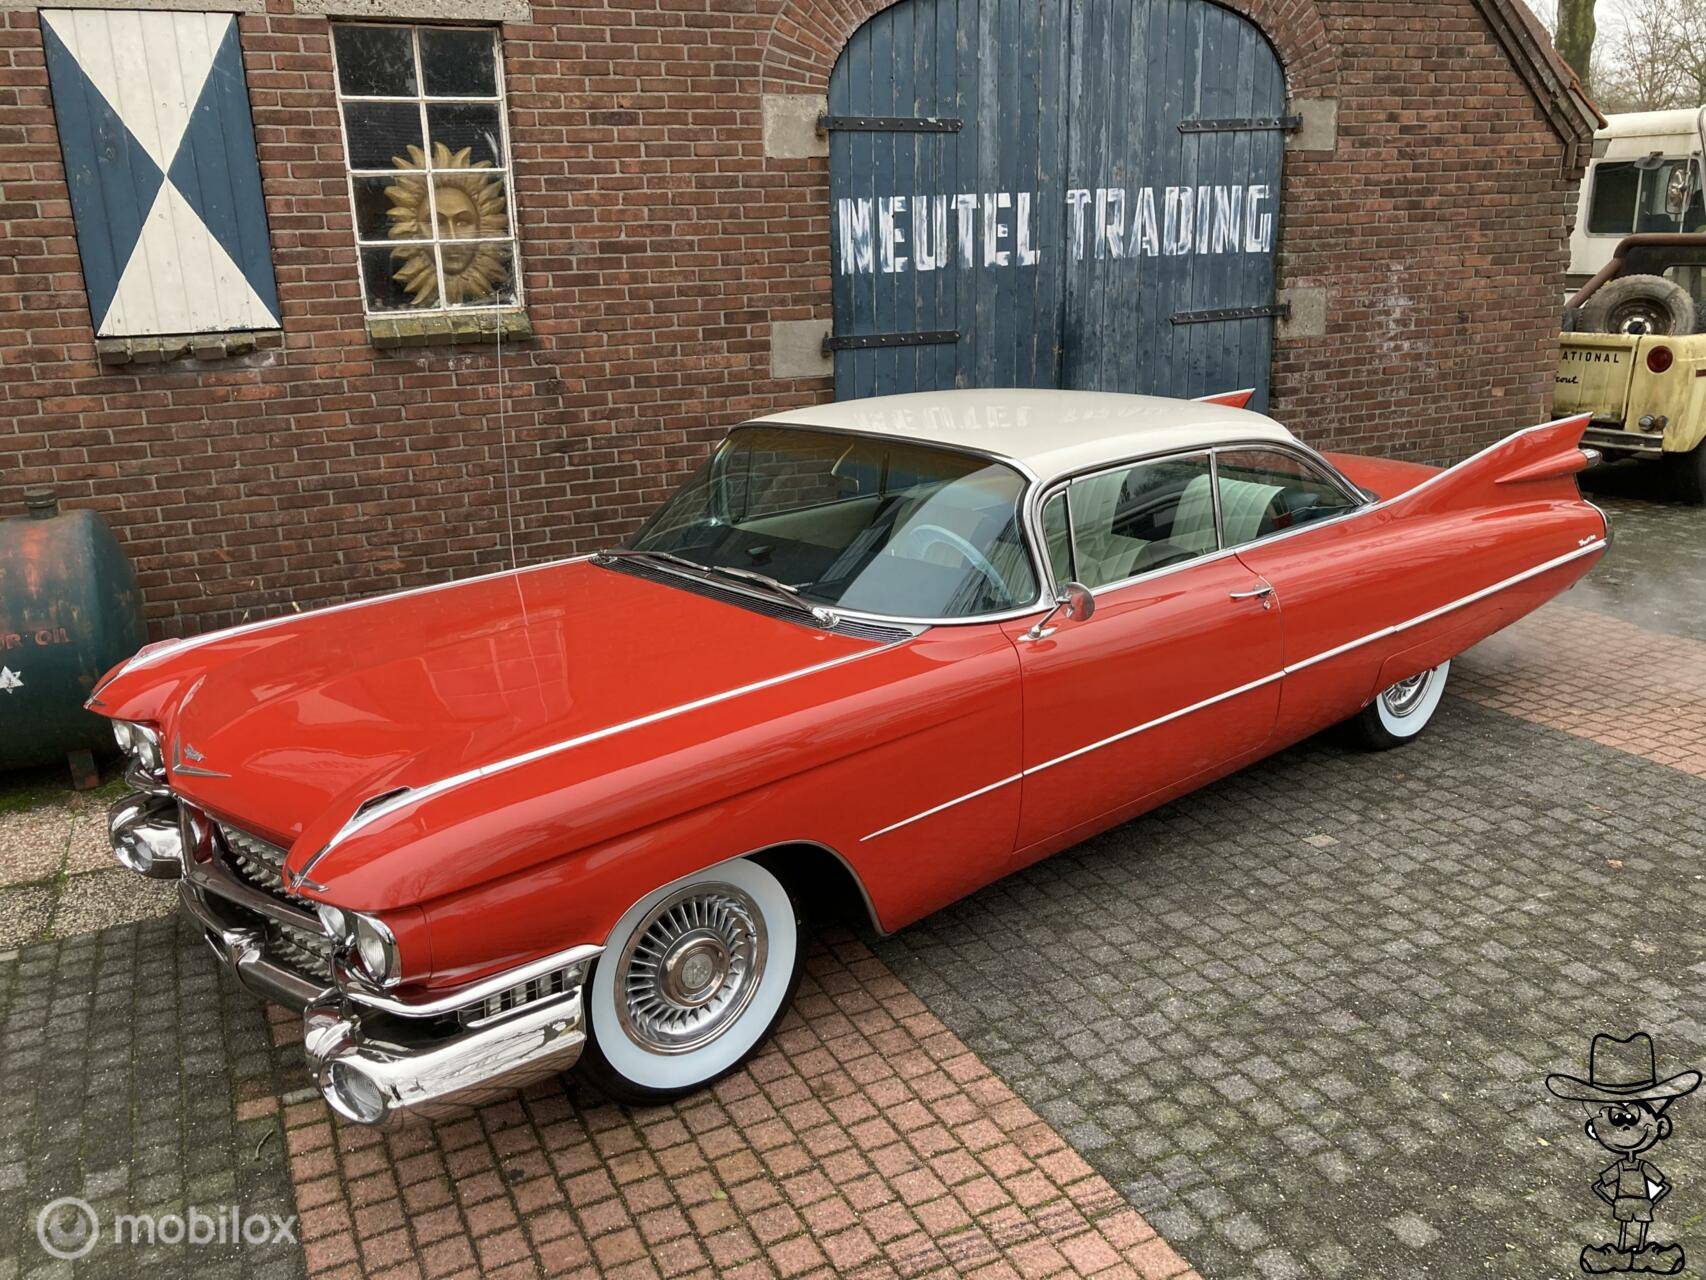 Cadillac Coup De Ville For Sale: Cadillac 62 Coupe DeVille (1959) offered for £42,568